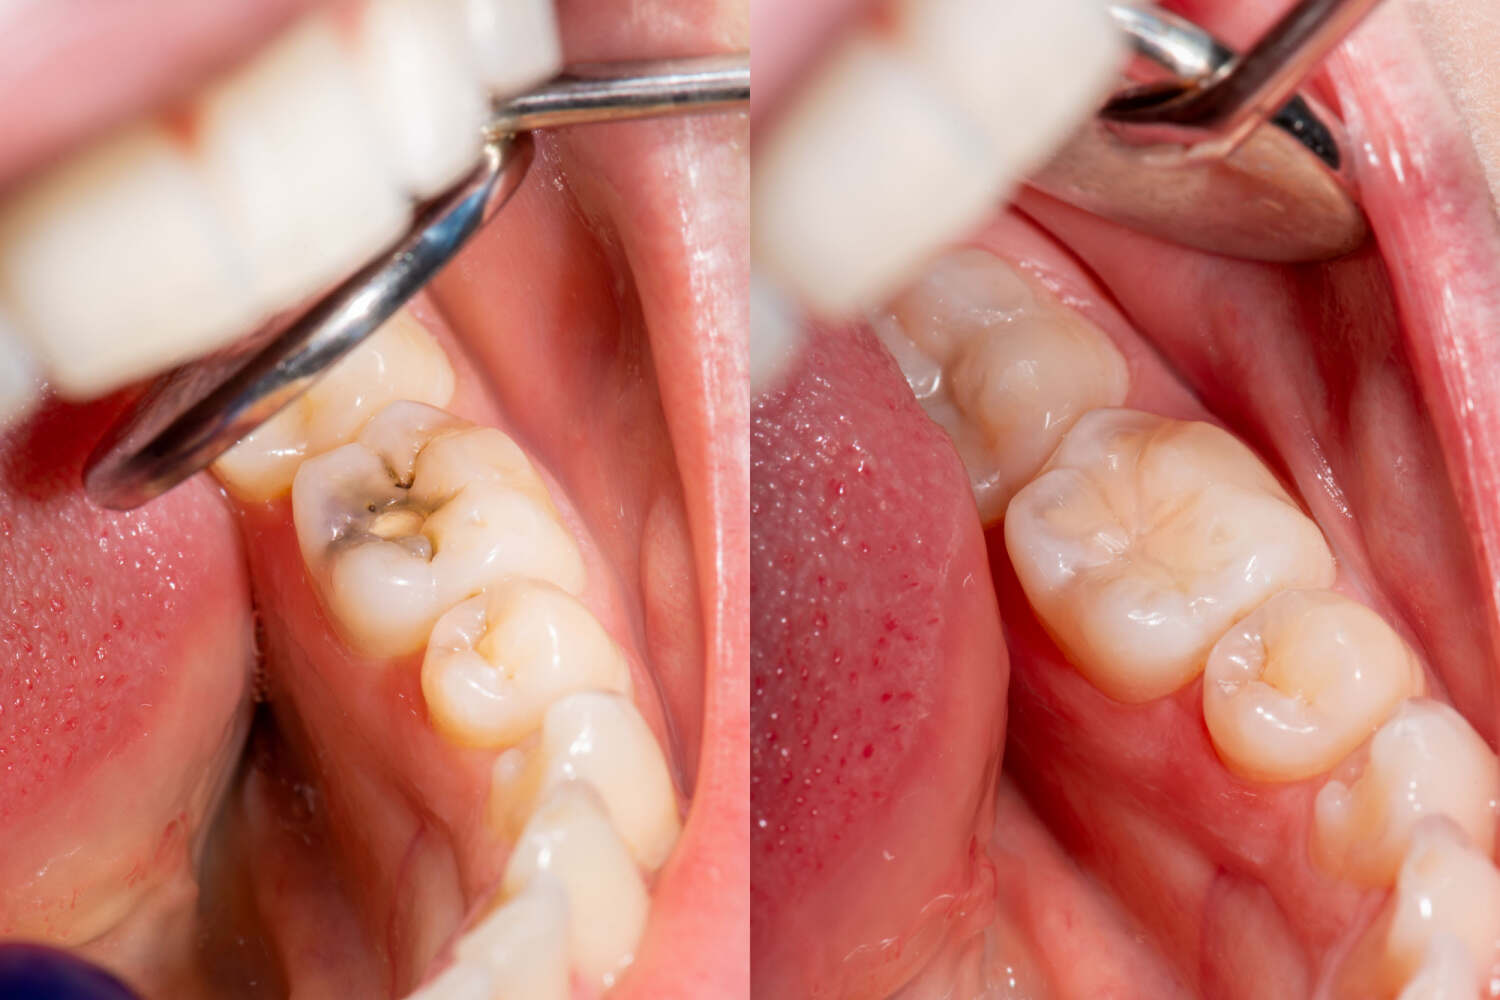 Teeth before and after filling